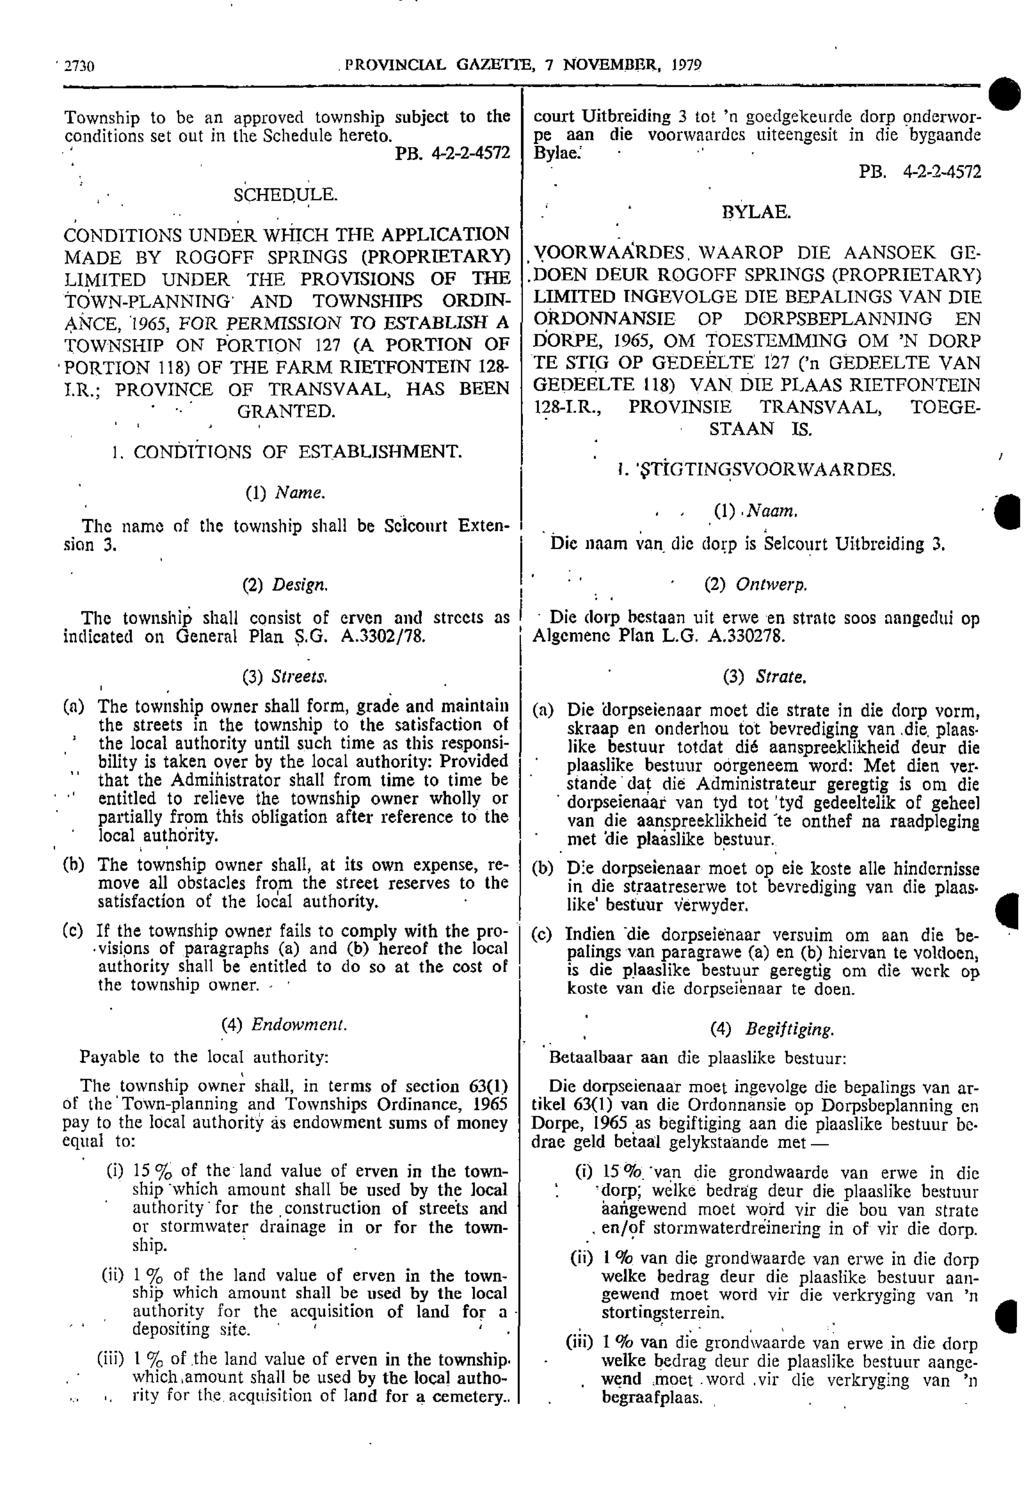 2730 PROVNCAL GAZETTE 7 NOVEMBER 1979 Township to be an approved township subject to the court Uitbreiding 3 tot n goedgekeurde dorp onderwor conditions set out in the Schedule hereto pe aan die